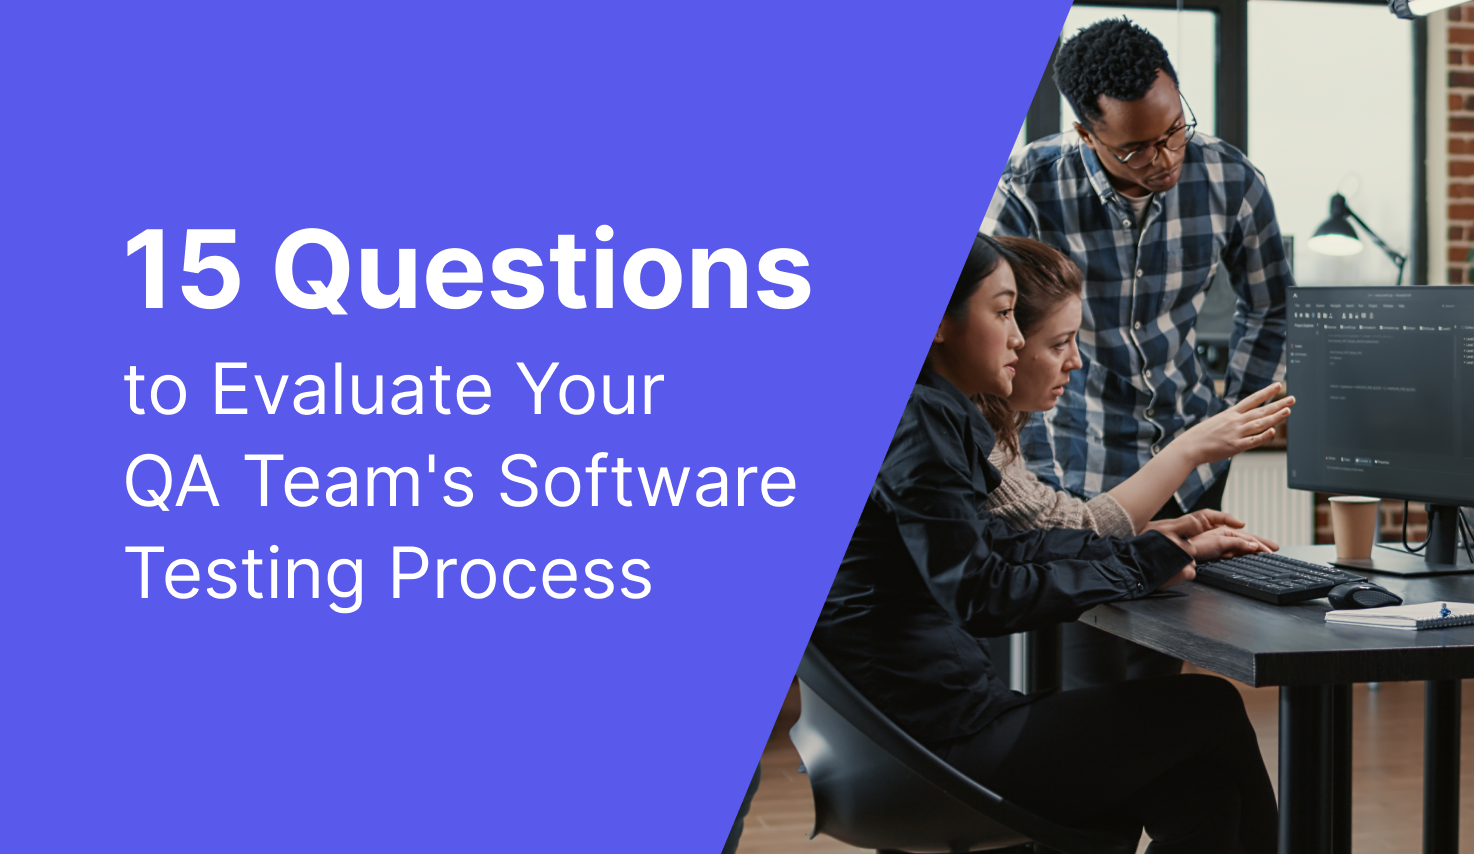 15 questions to evaluate your QA team's software testing process